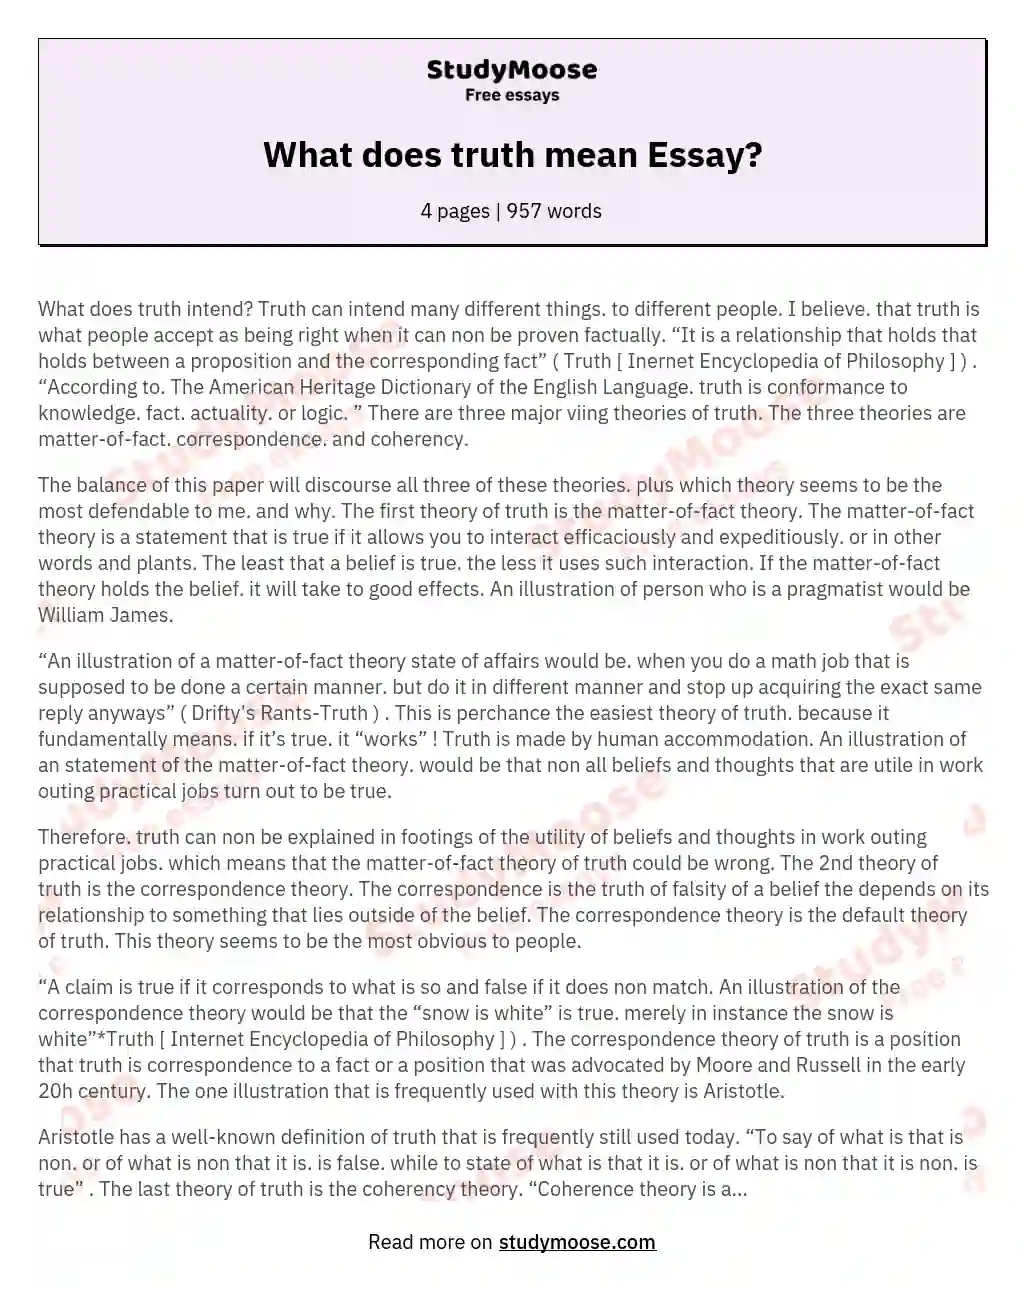 essay about why truth is important